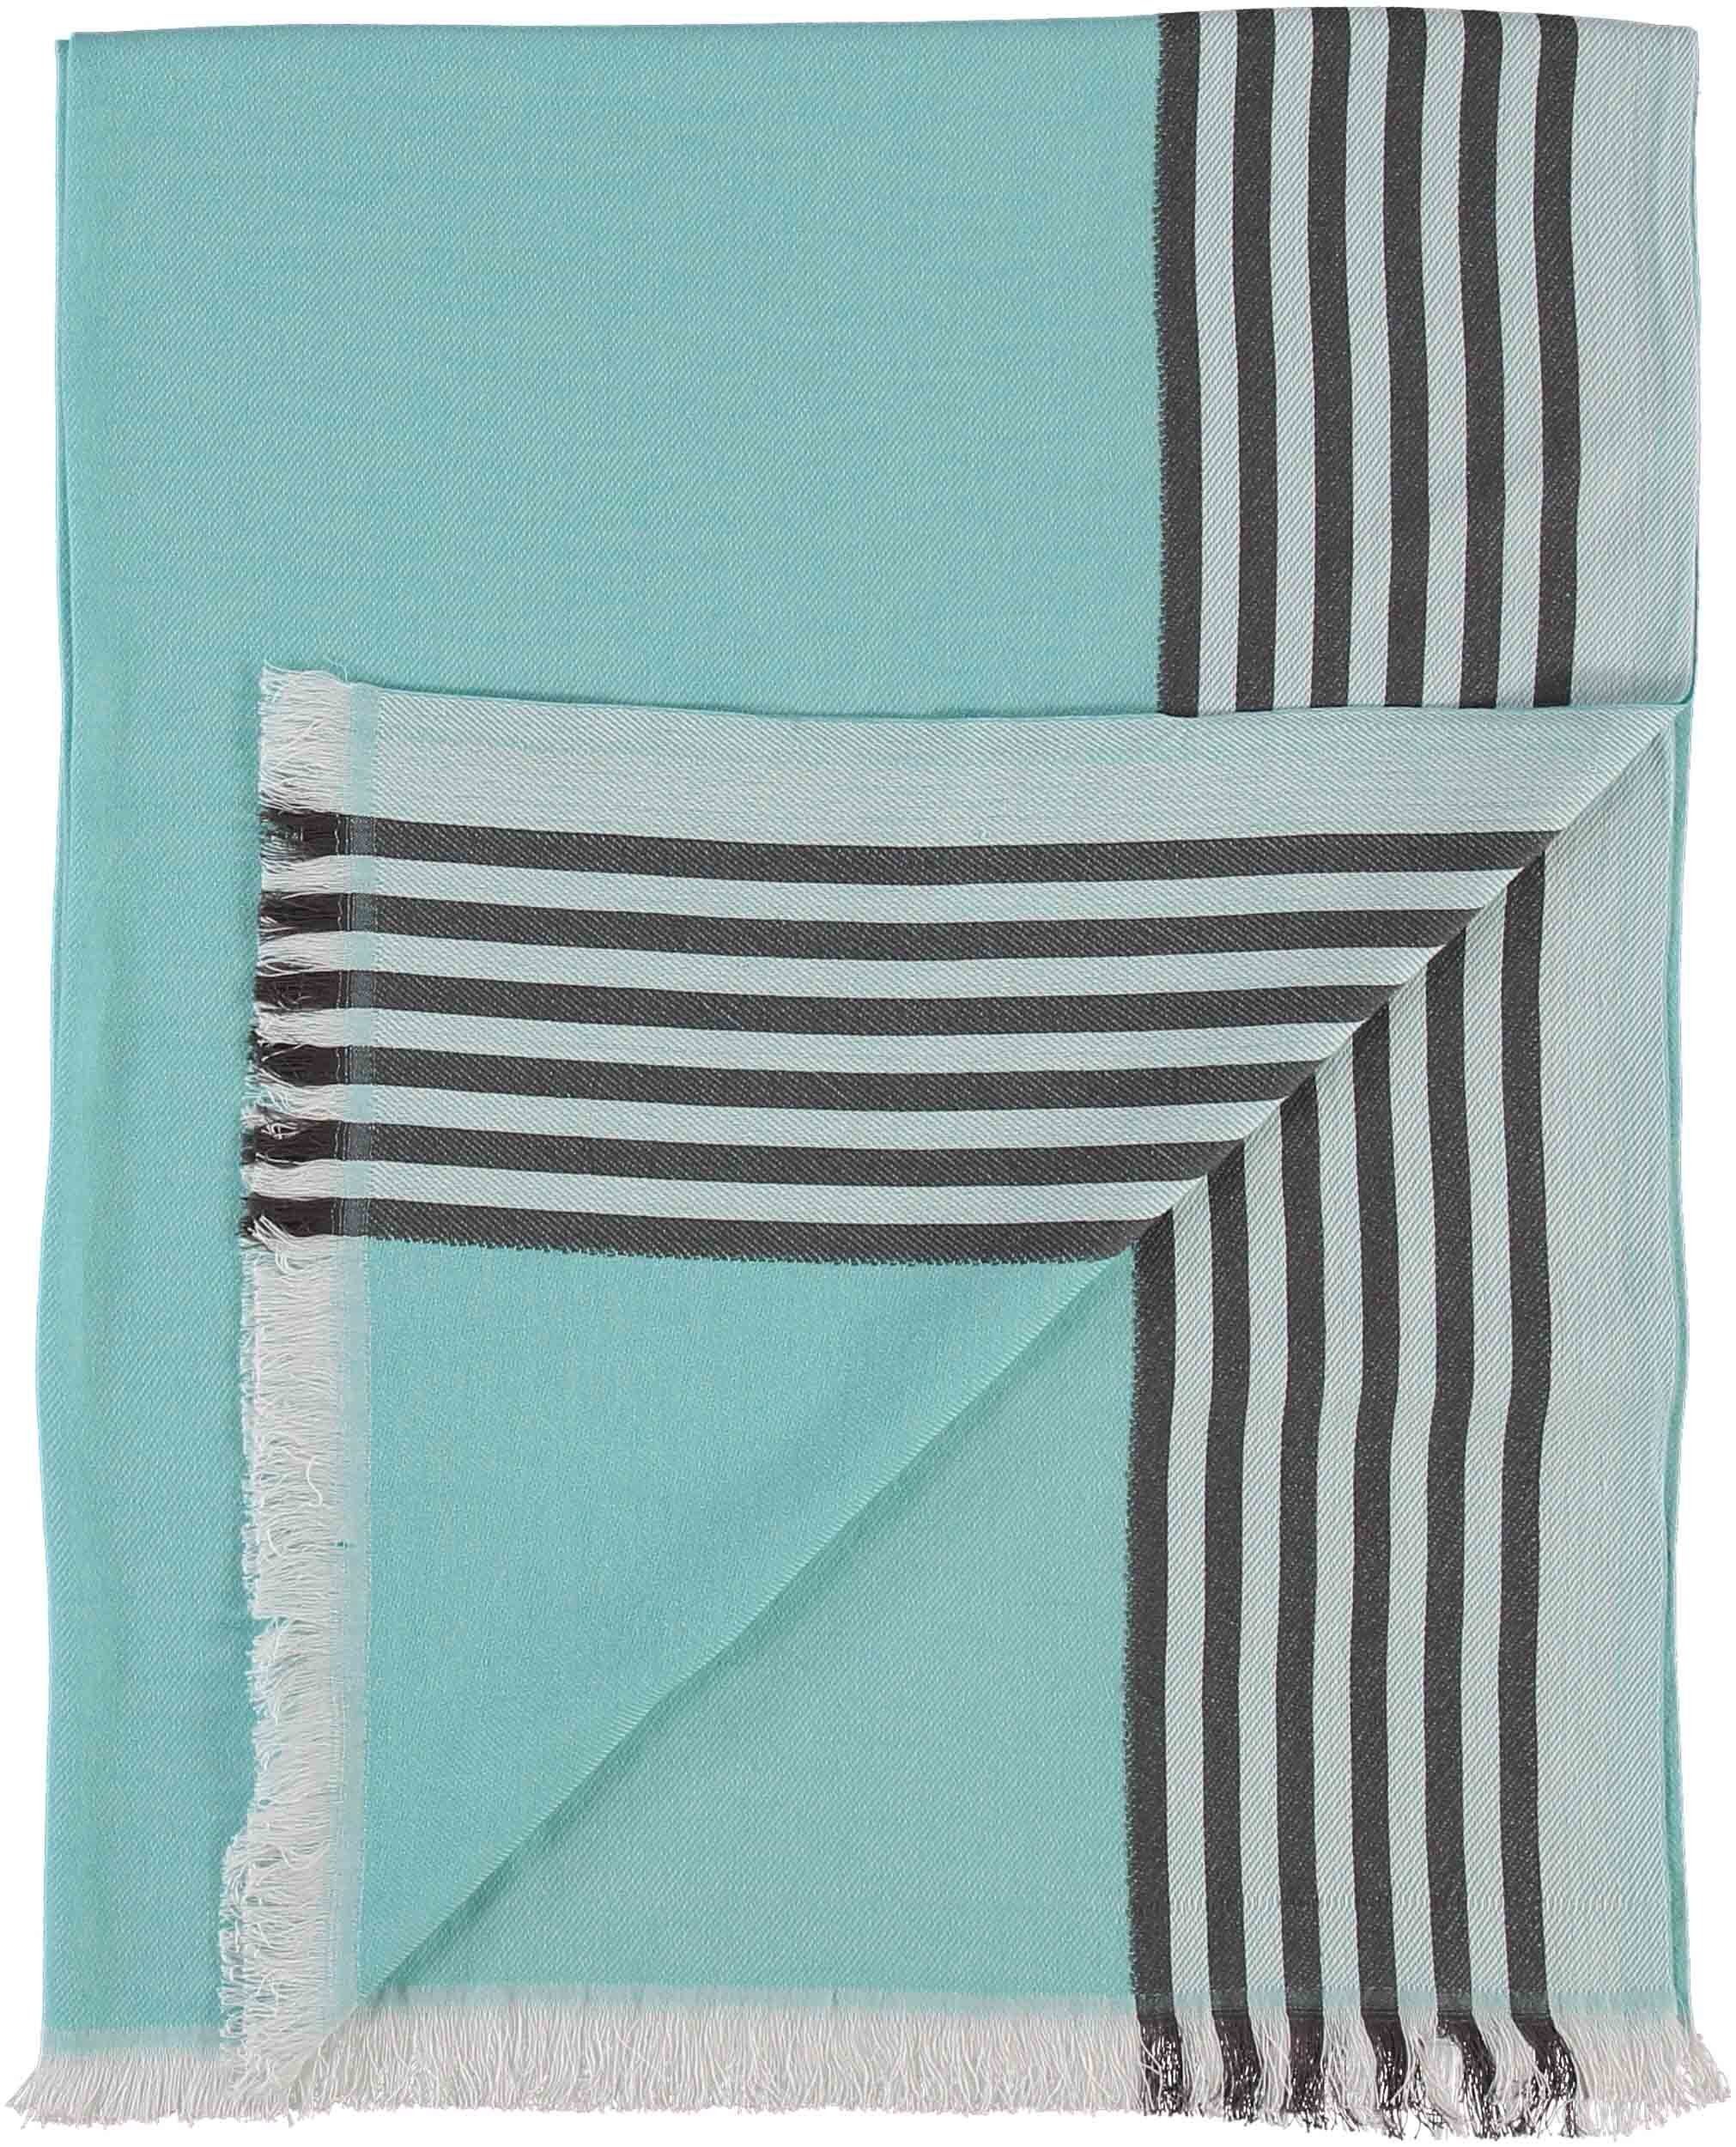 turquoise Modetuch (1-St) light Fraas Tuch, Baumwolle